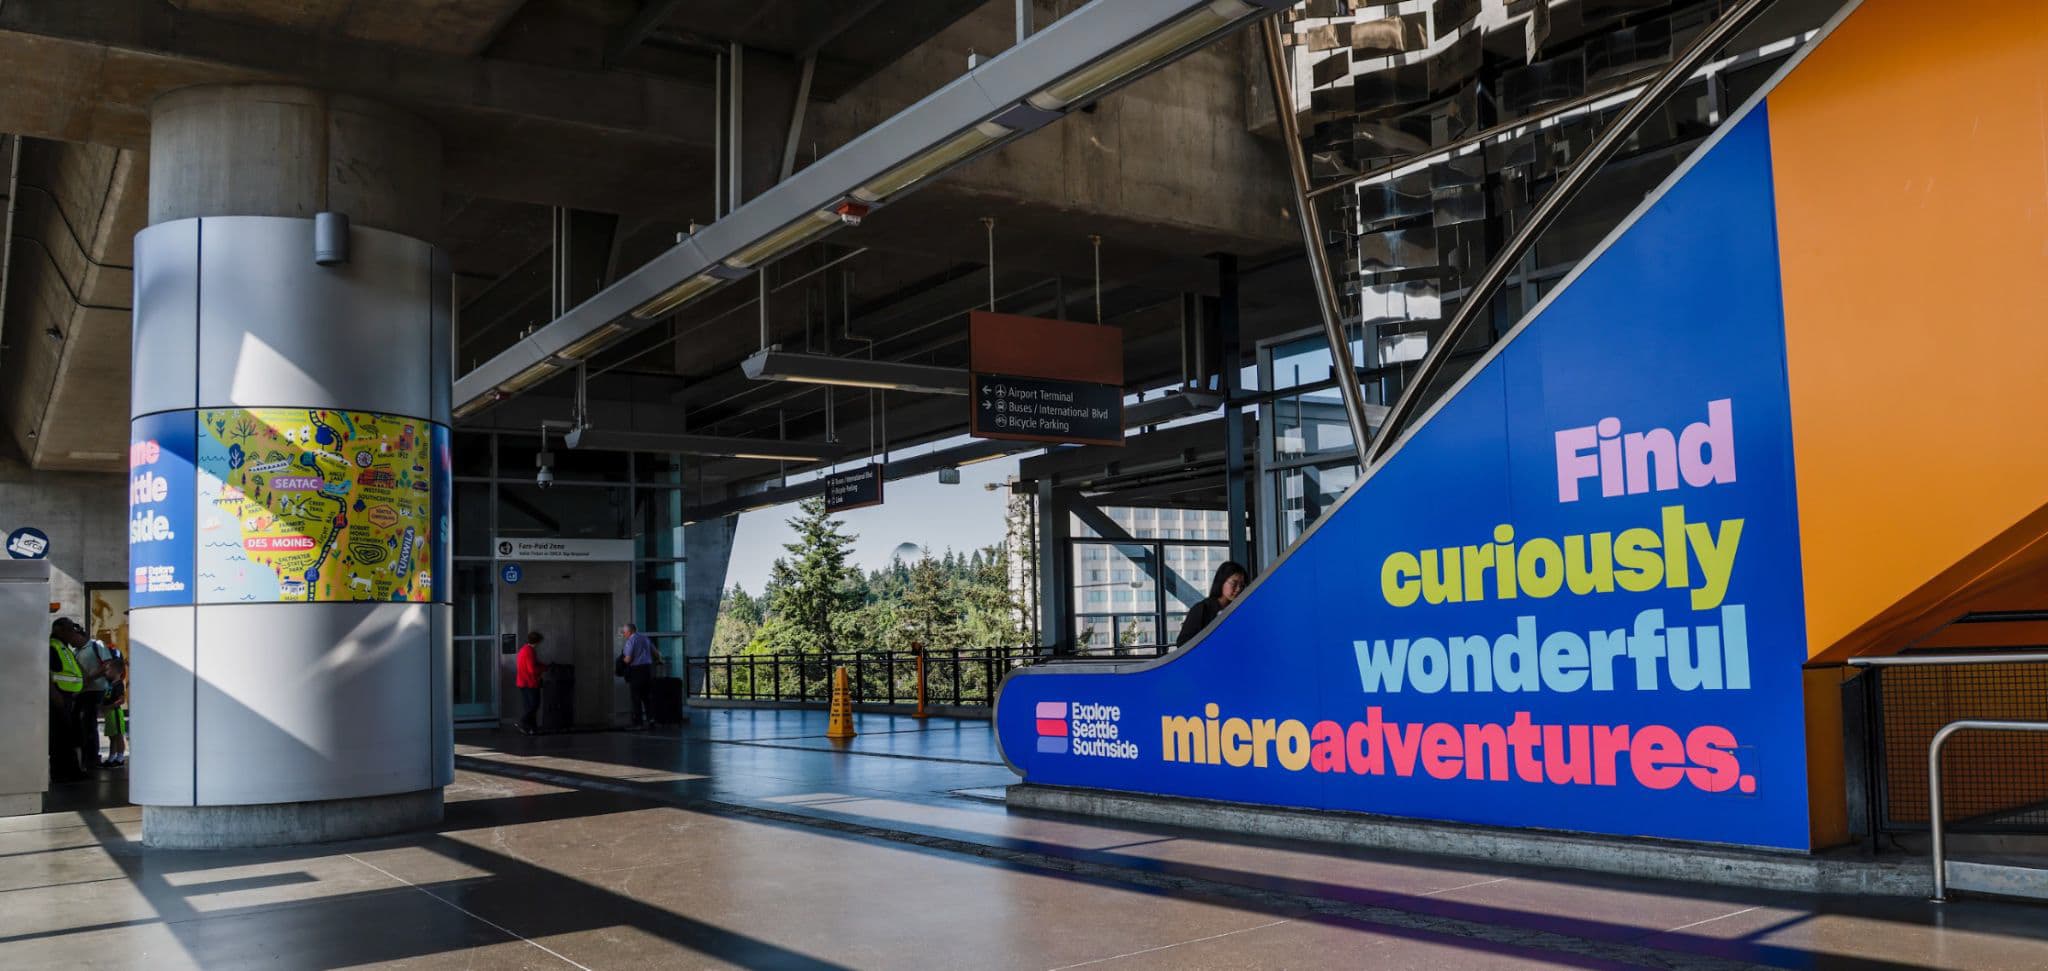 A photo of Seattle Southside's brand in action. There is a blue vinyl on an escalator that says 'Find curiously wonderful microadventures'.